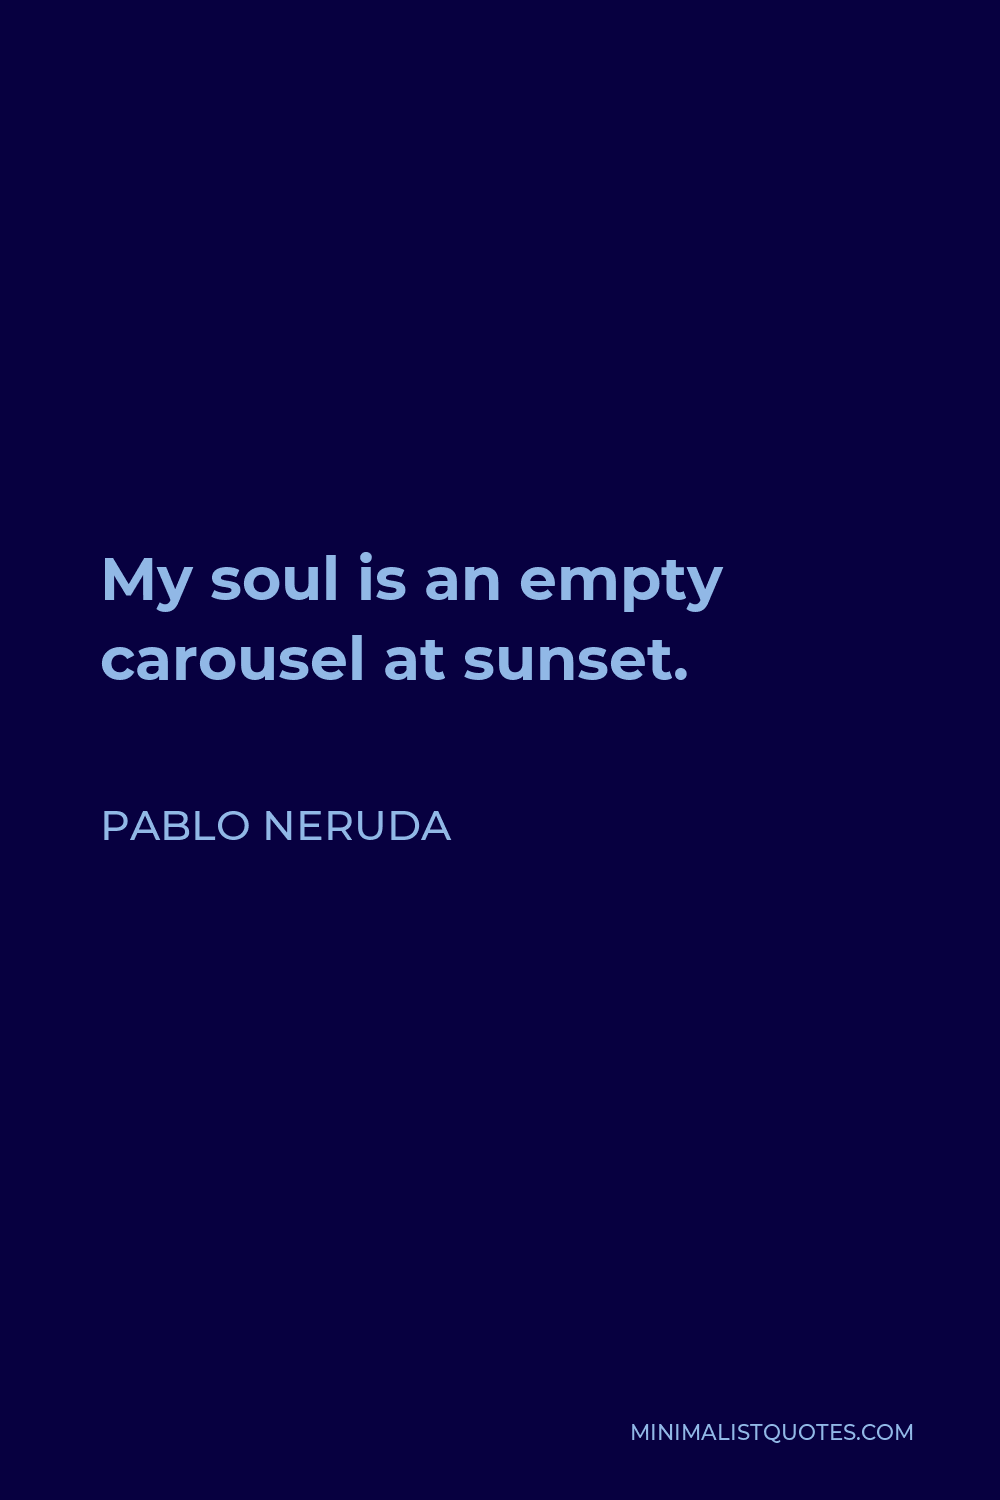 Pablo Neruda Quote - My soul is an empty carousel at sunset.